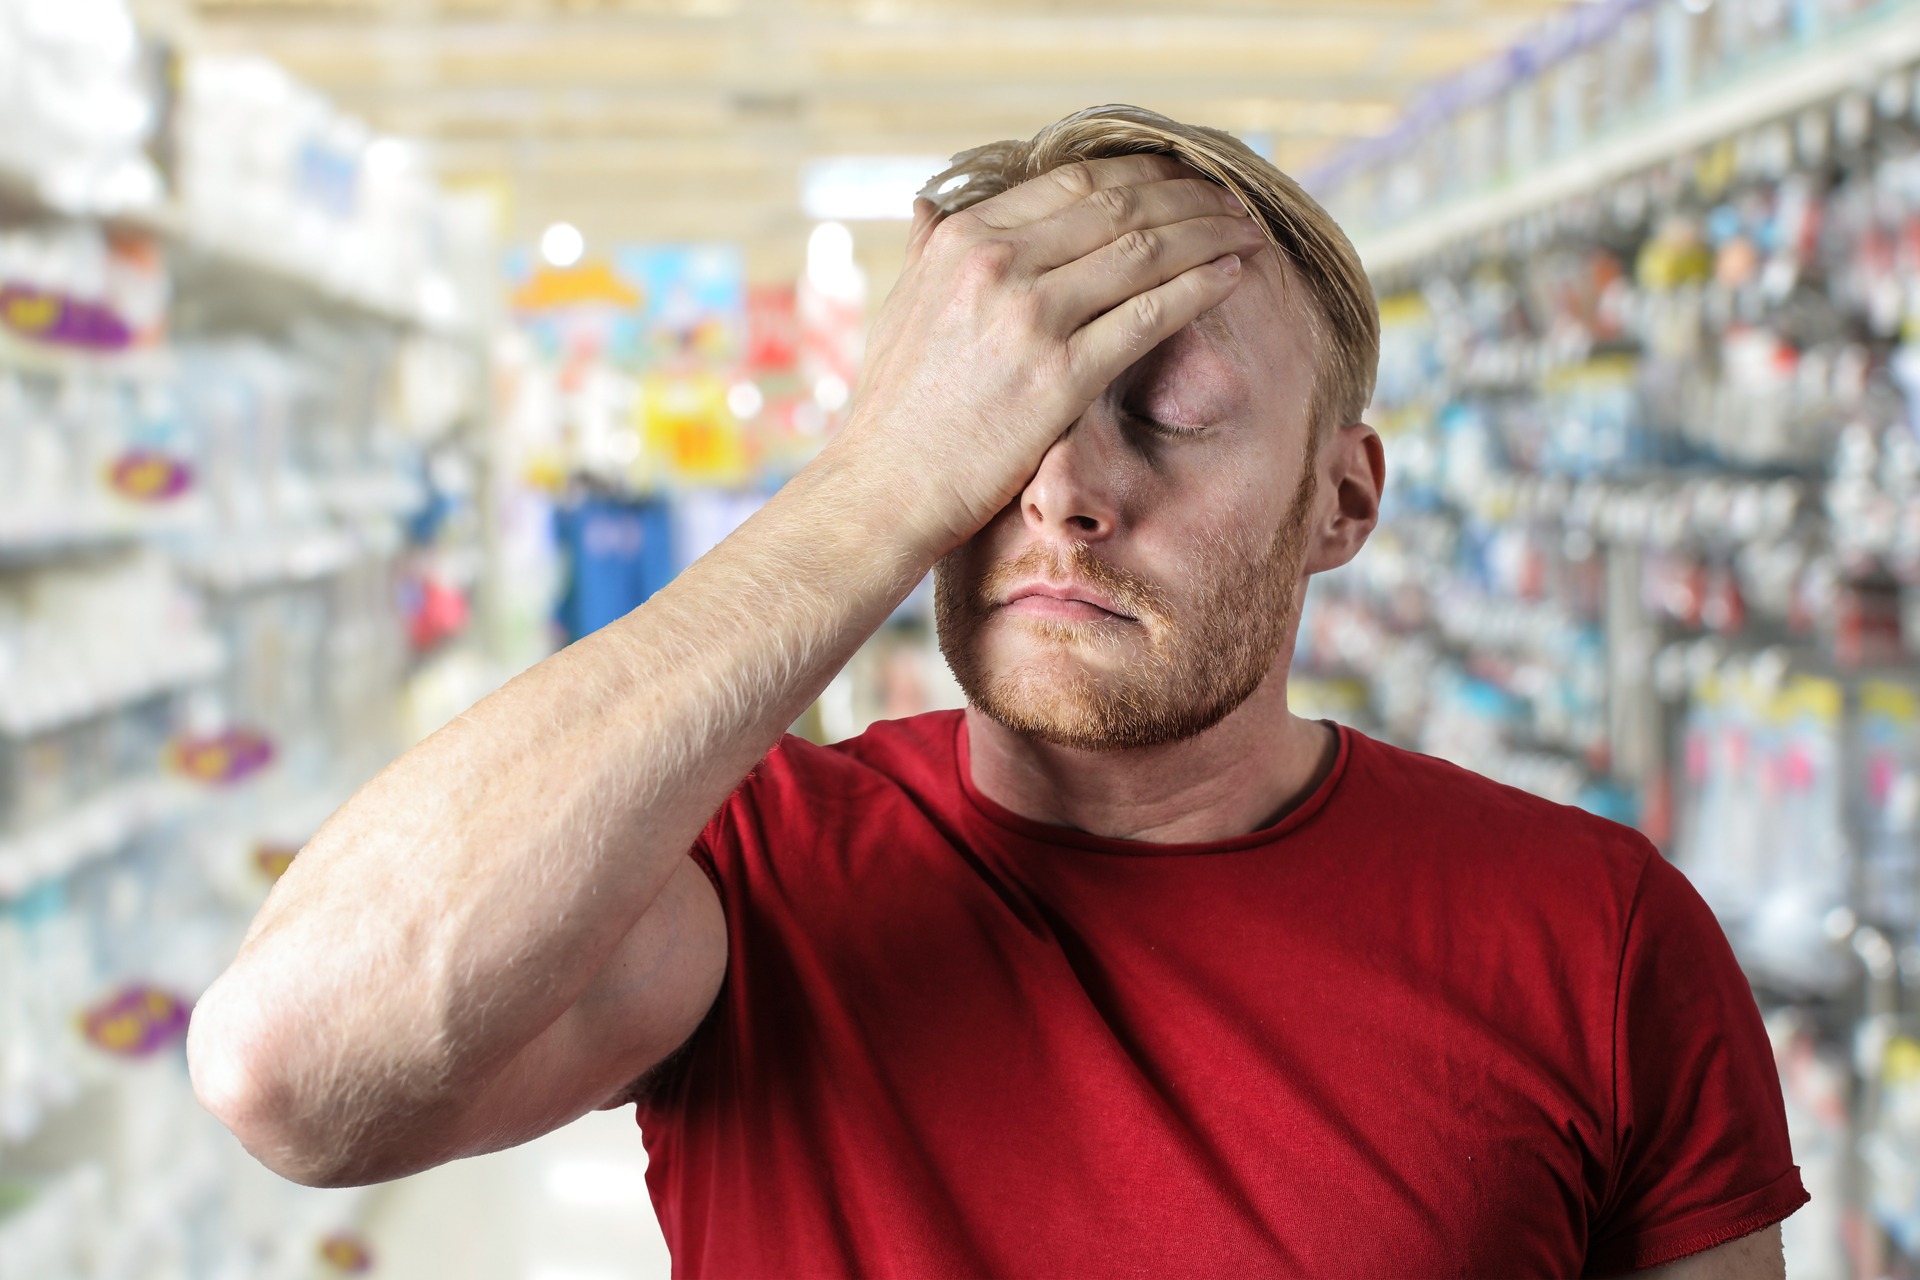 A man stands in a supermarket, rubbing at his face in frustration.